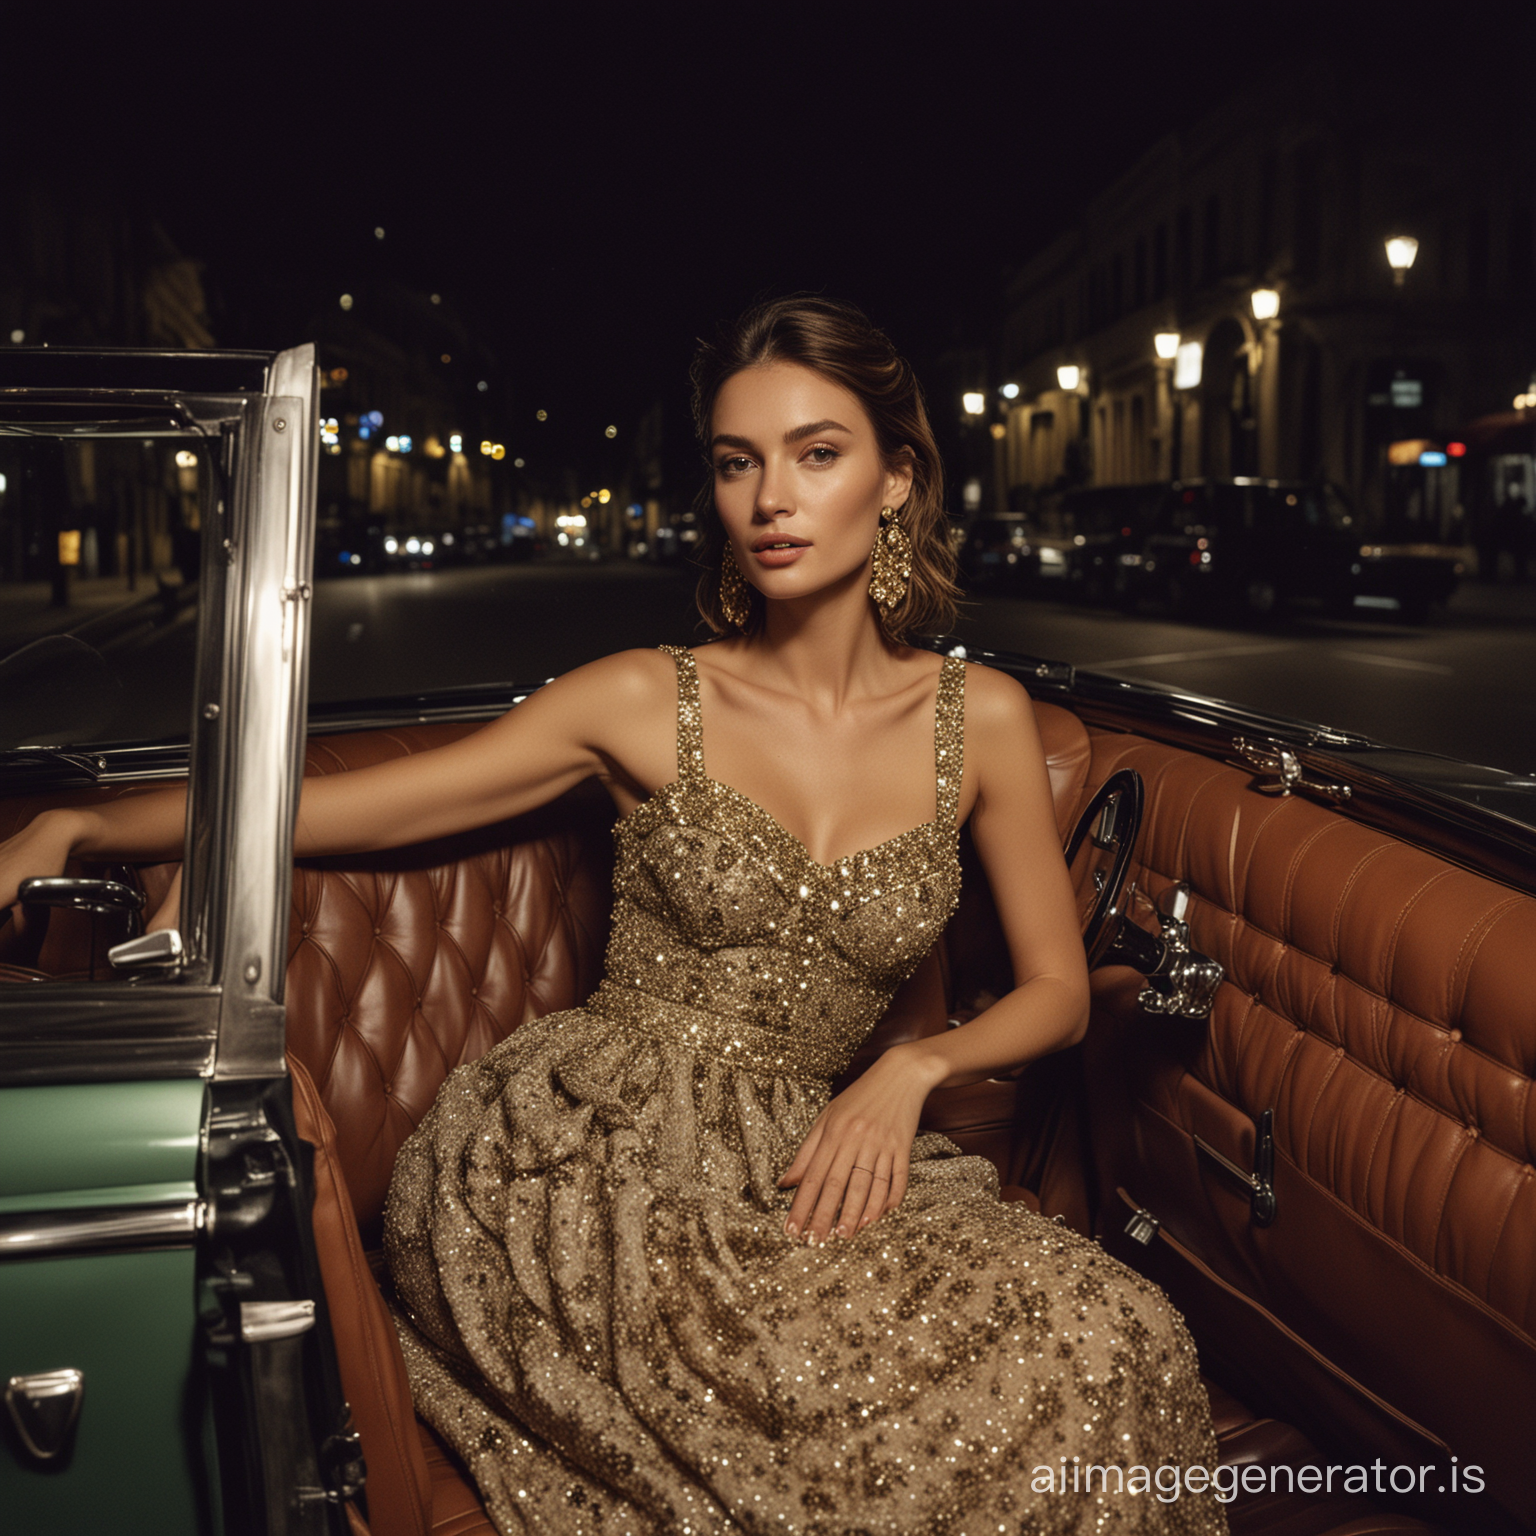 a Dolce & Gabbana style fashion campaign of a woman supermodel posing inside the back seat of a luxury vintage car, outside the car there are photographers and photographers, at night